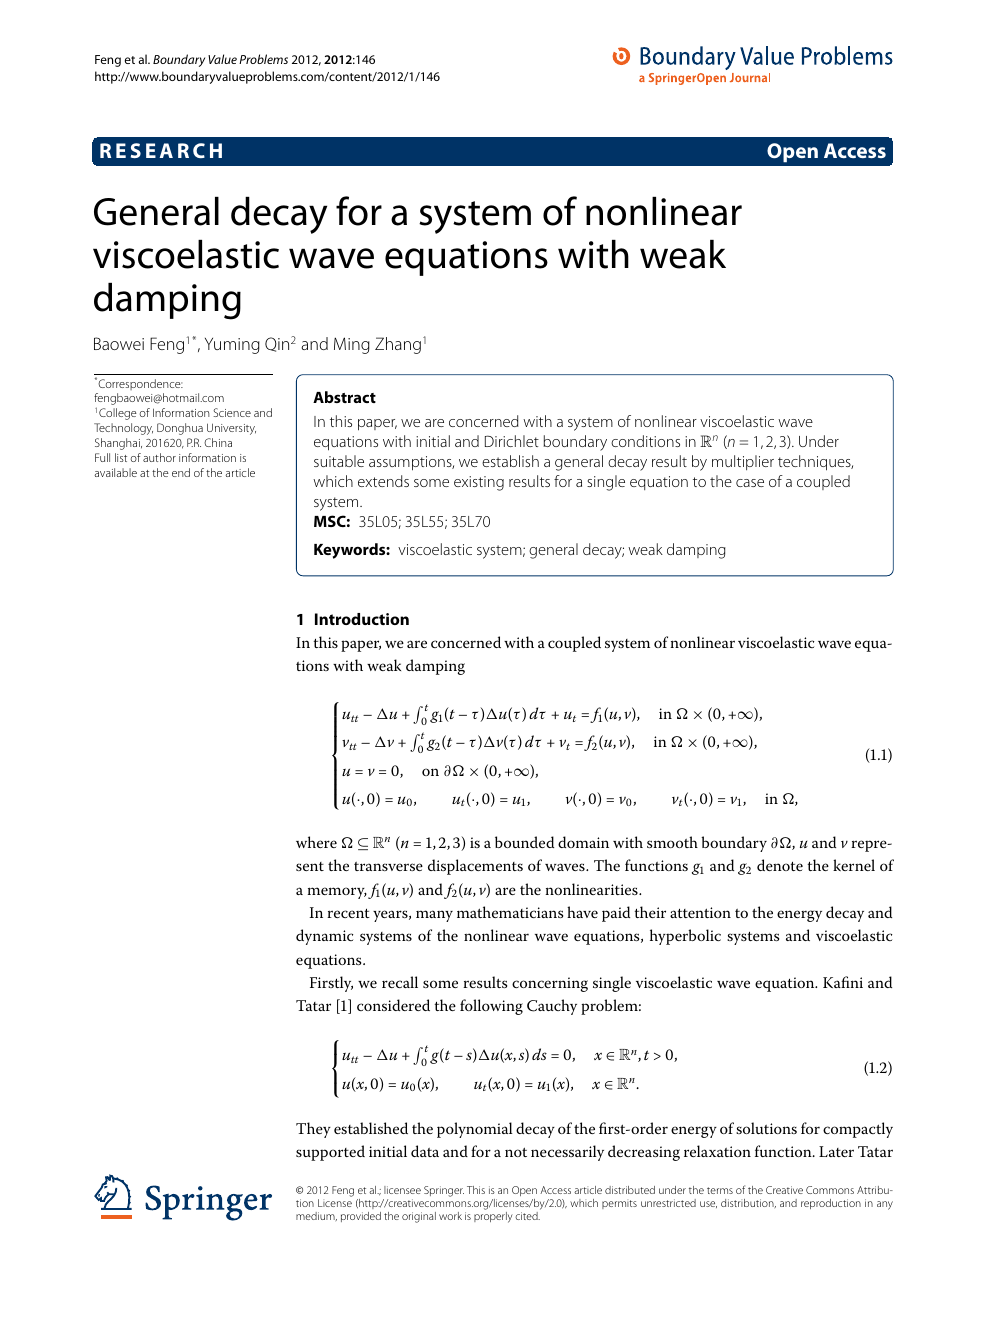 General Decay For A System Of Nonlinear Viscoelastic Wave Equations With Weak Damping Topic Of Research Paper In Mathematics Download Scholarly Article Pdf And Read For Free On Cyberleninka Open Science